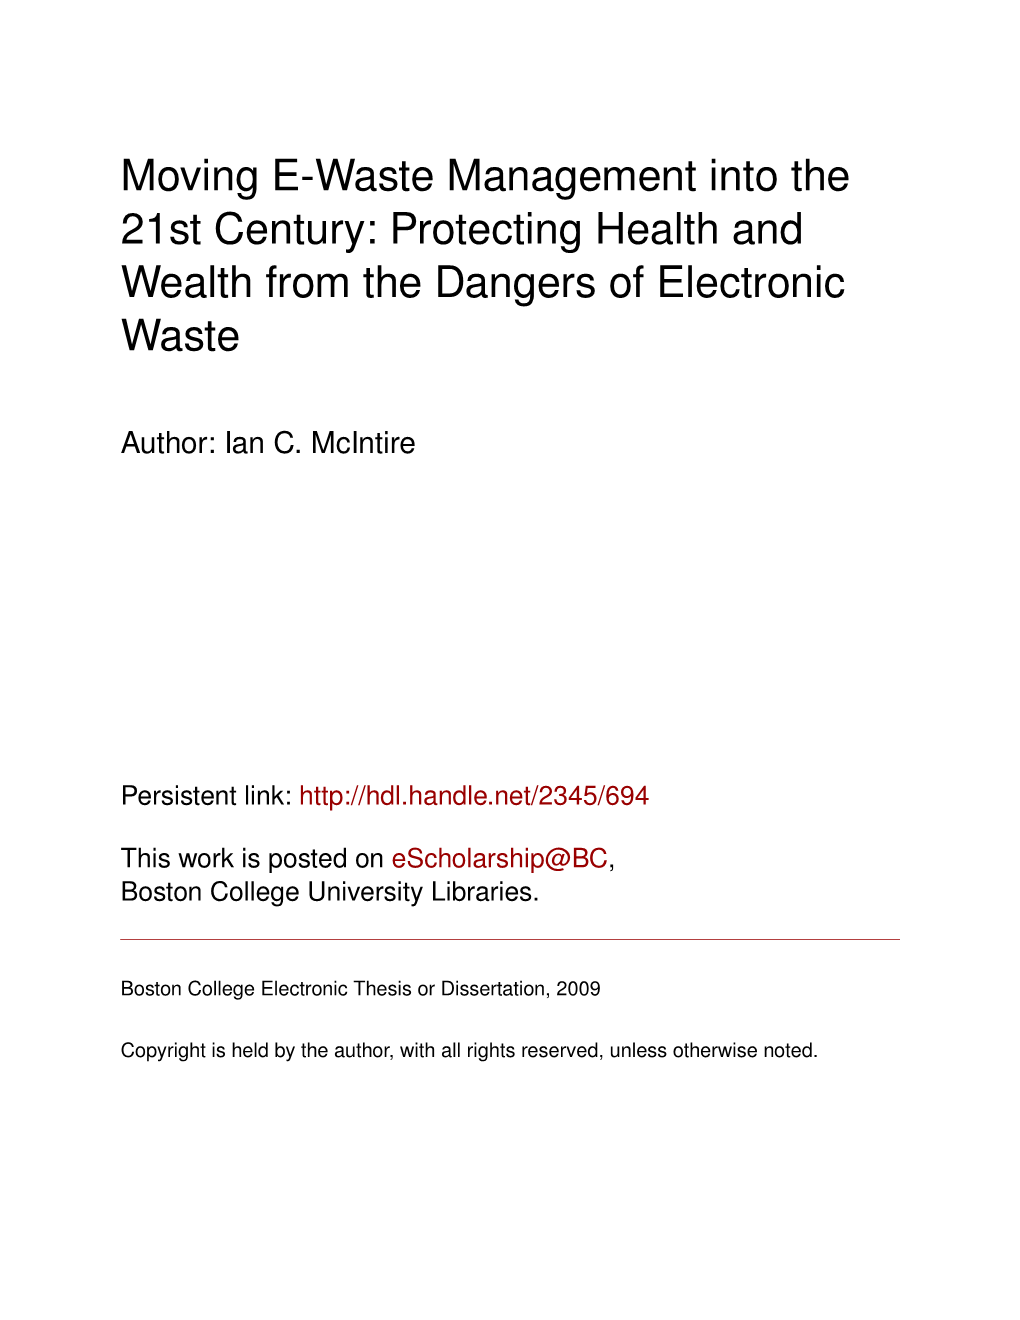 Moving E-Waste Management Into the 21St Century: Protecting Health and Wealth from the Dangers of Electronic Waste